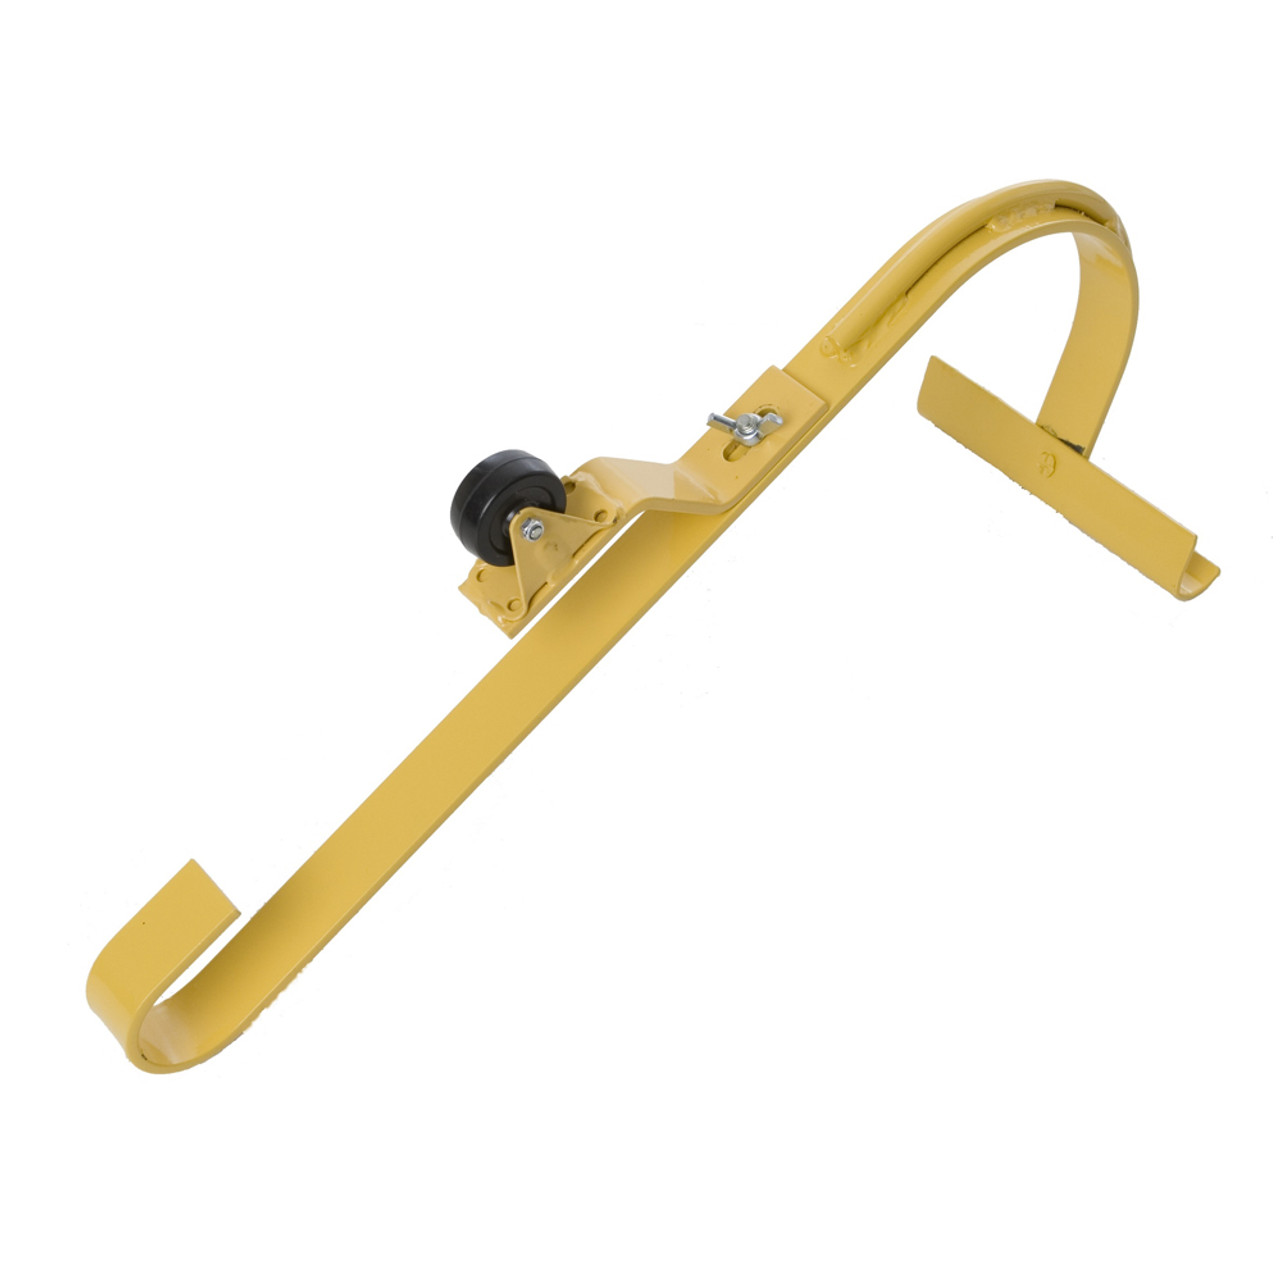 The Ridge Pro Roof Peak Anchor for steep roofs.